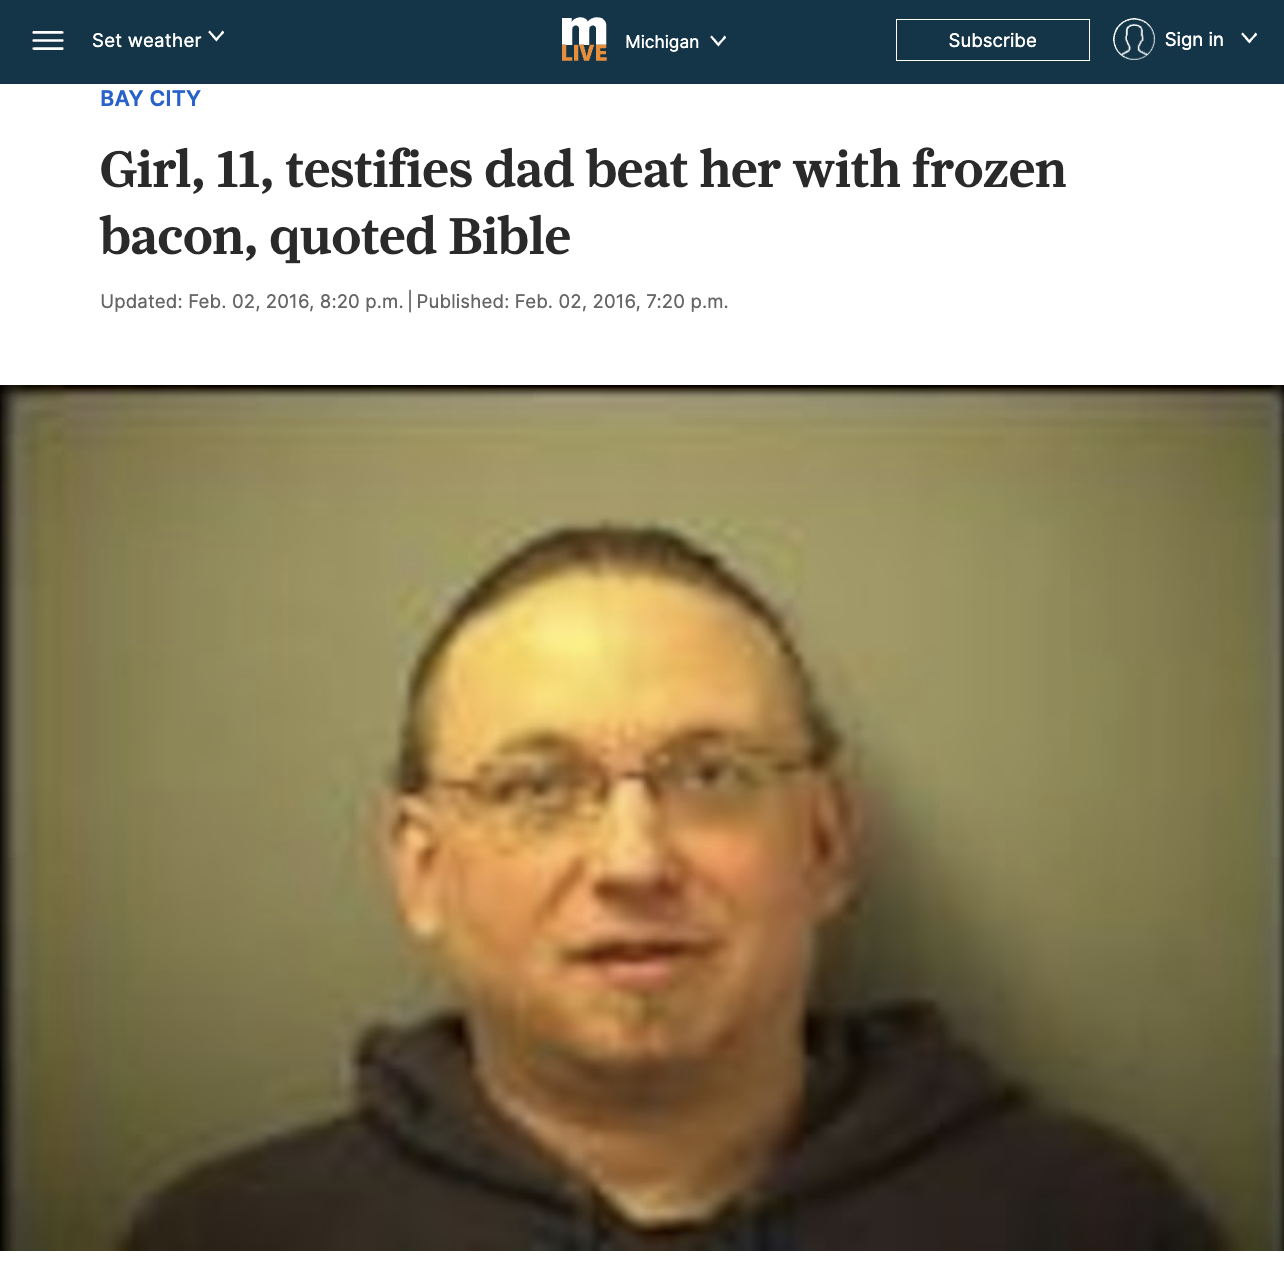 screenshot - Set weather Bay City Michigan Subscribe Sign in v Girl, 11, testifies dad beat her with frozen bacon, quoted Bible Updated Feb. 02, 2016, p.m. | Published Feb. 02, 2016, p.m.